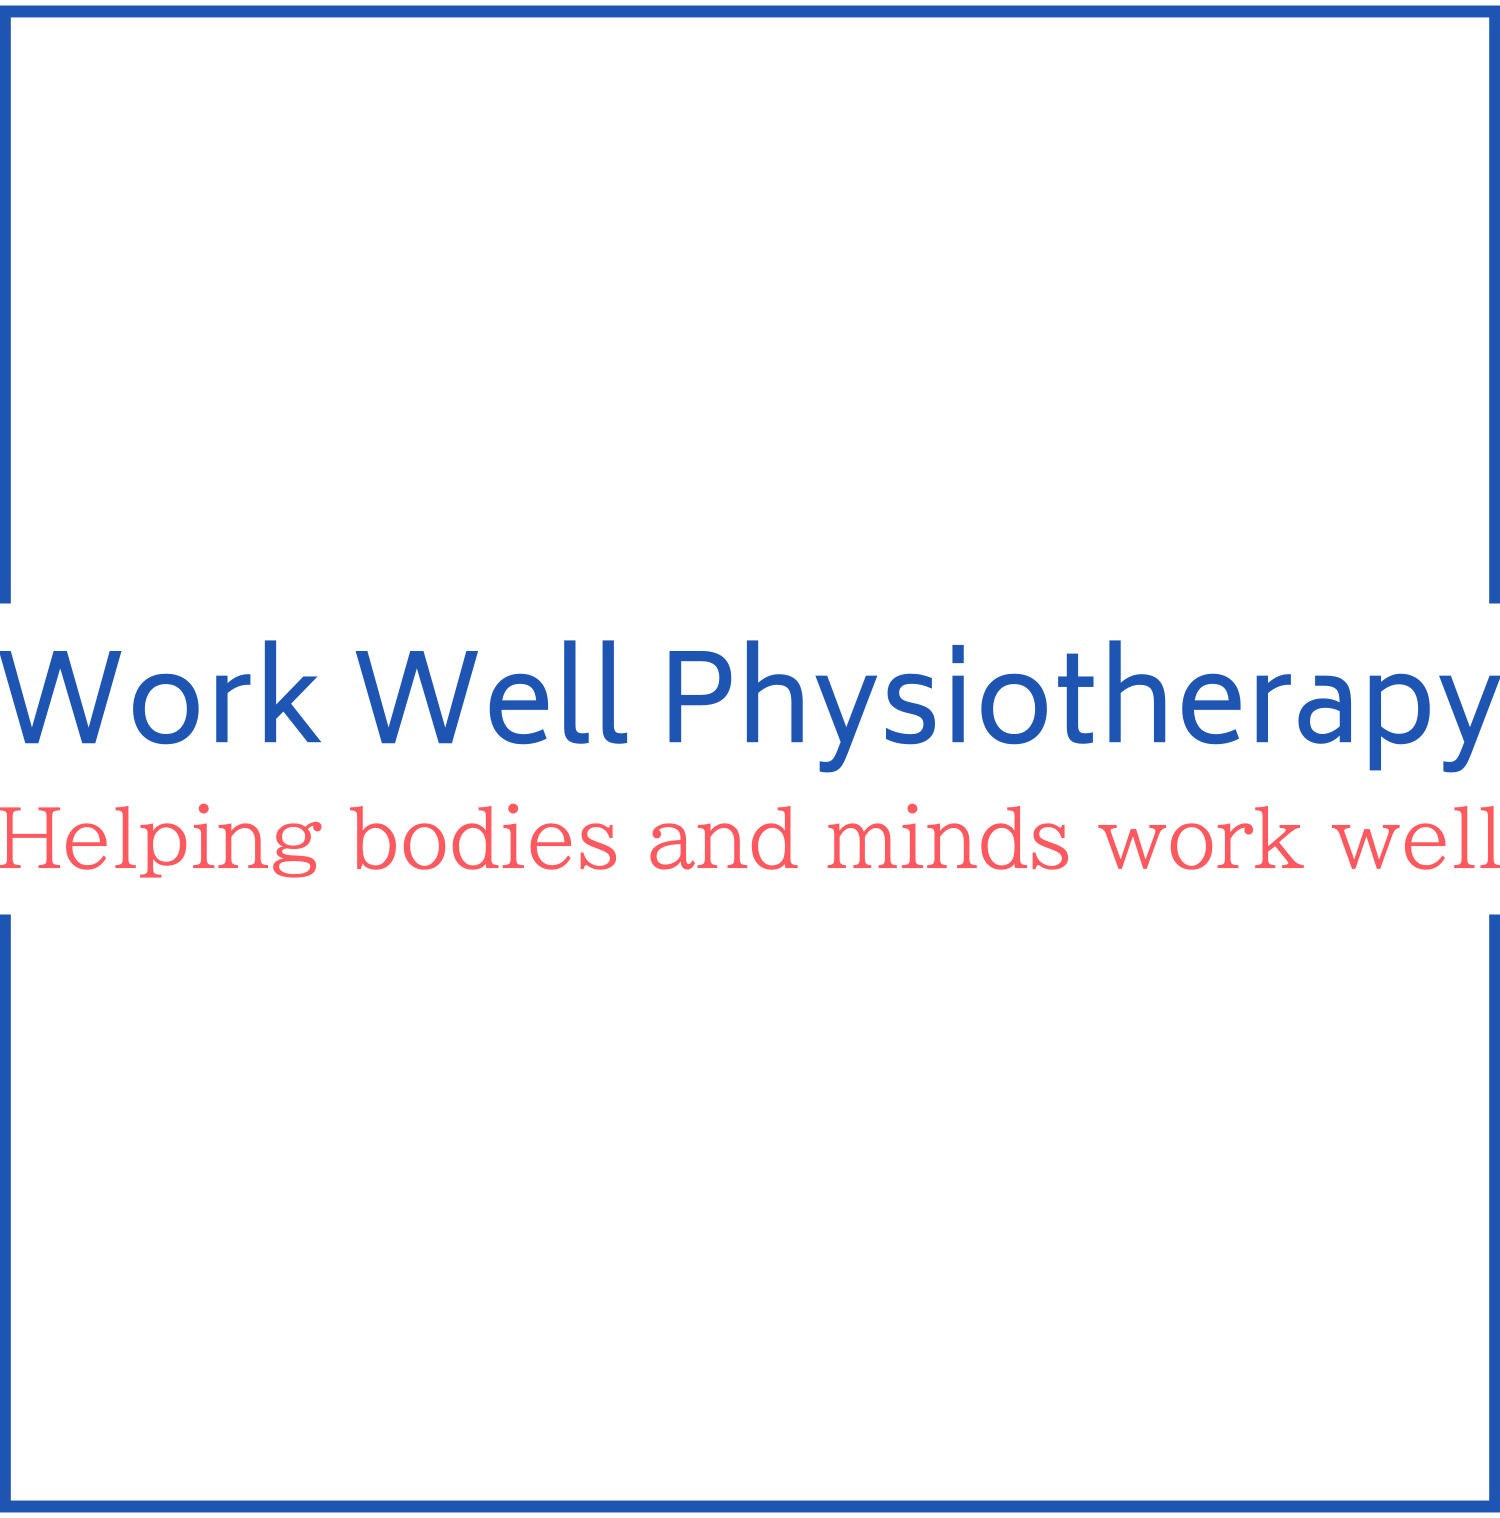 Work Well Physiotherapy